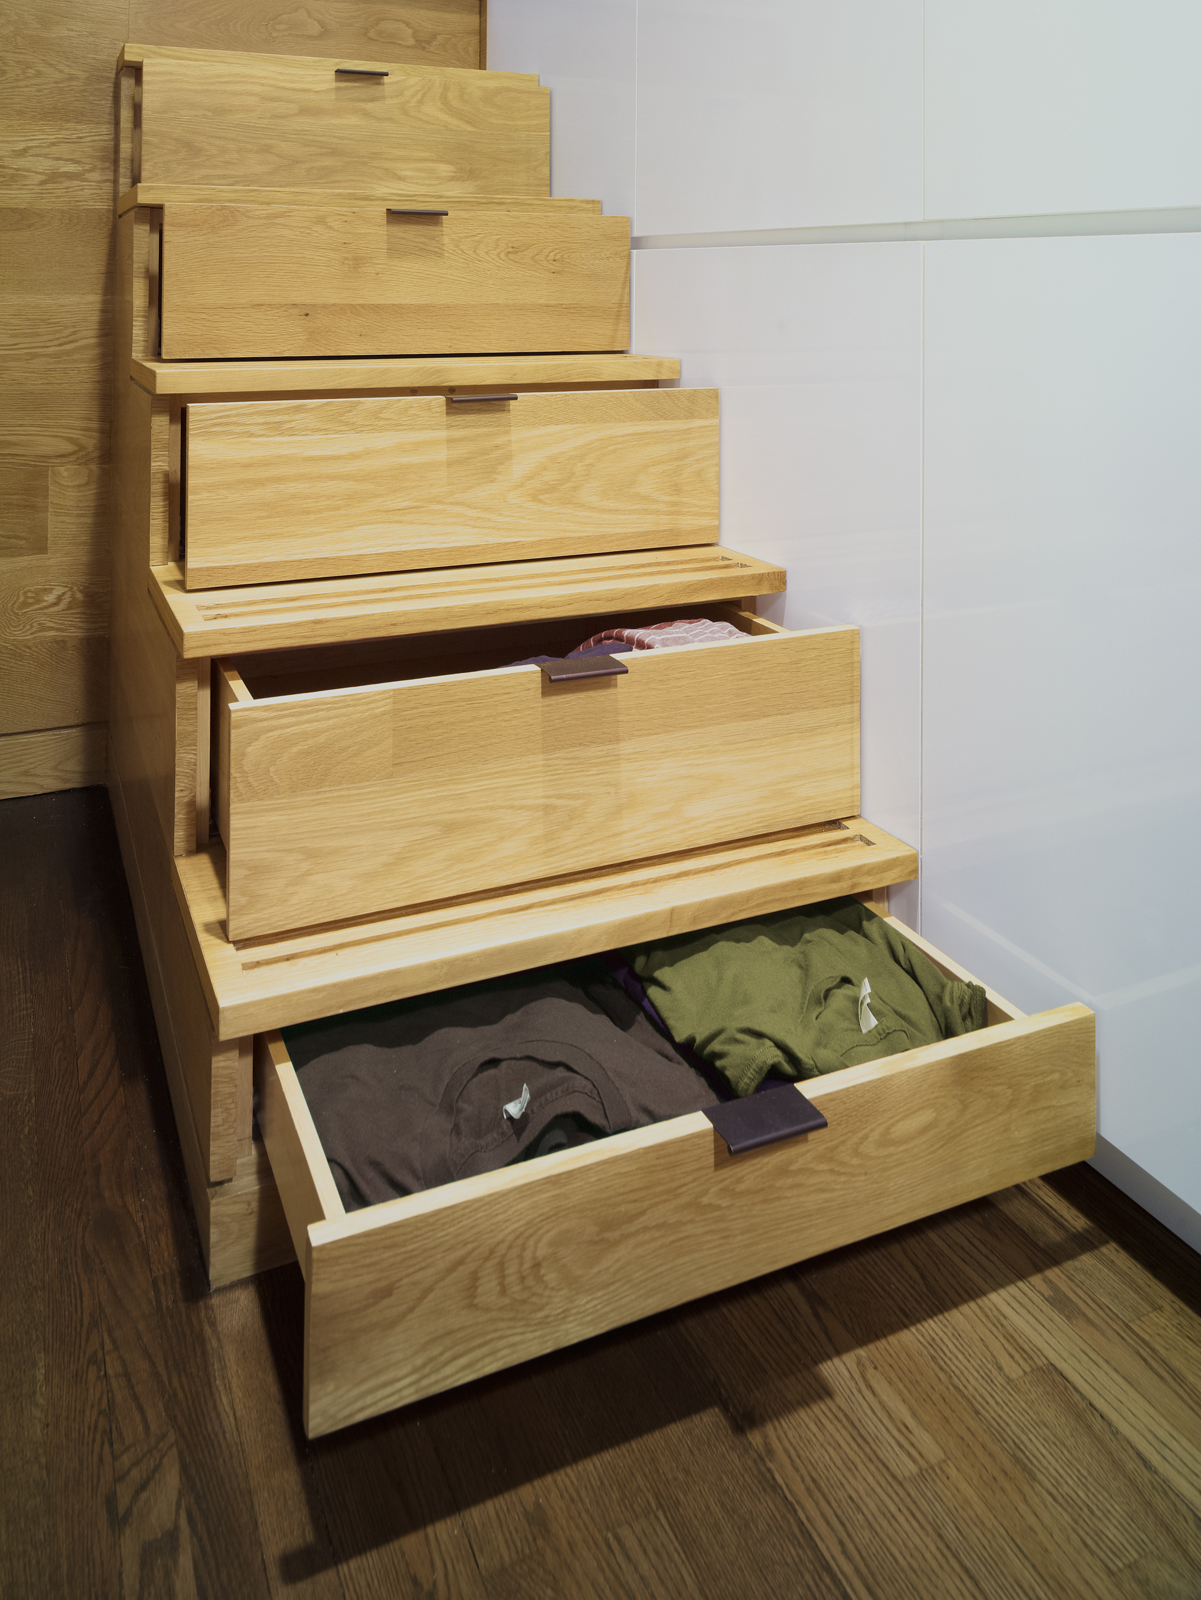 Stair risers leading up to the sleeping loft pull open to reveal hidden drawers.